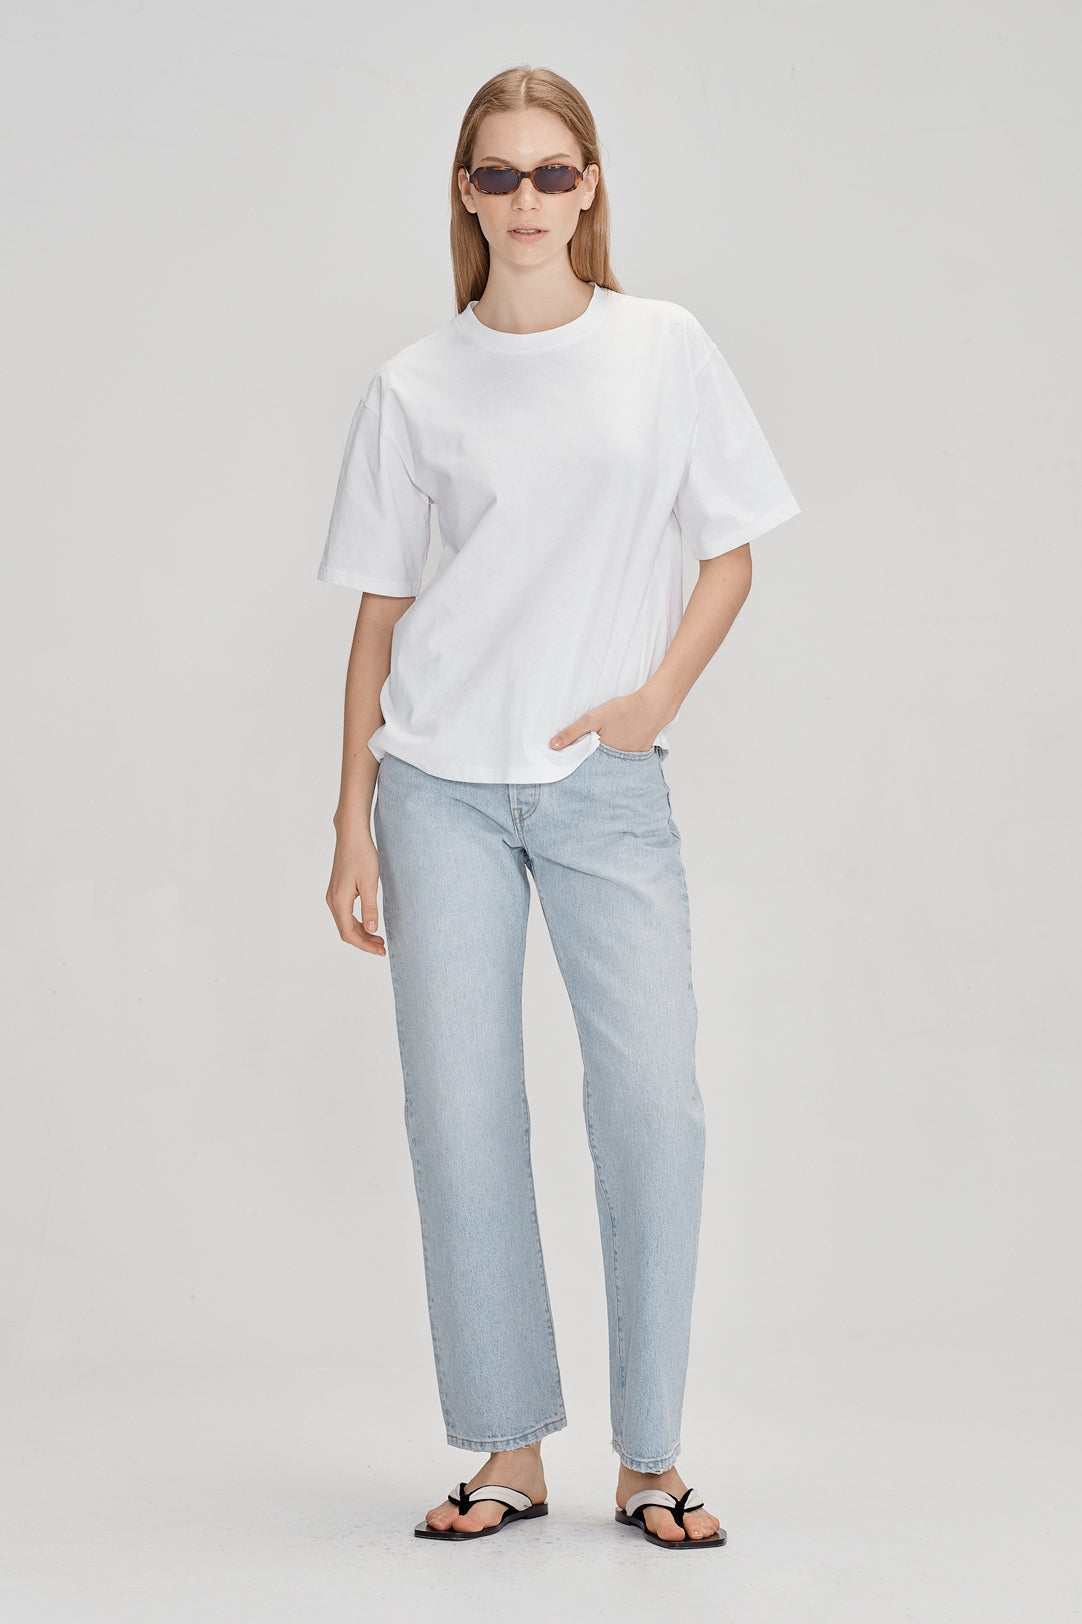 Commoners Organic Cotton Relaxed Tee - White